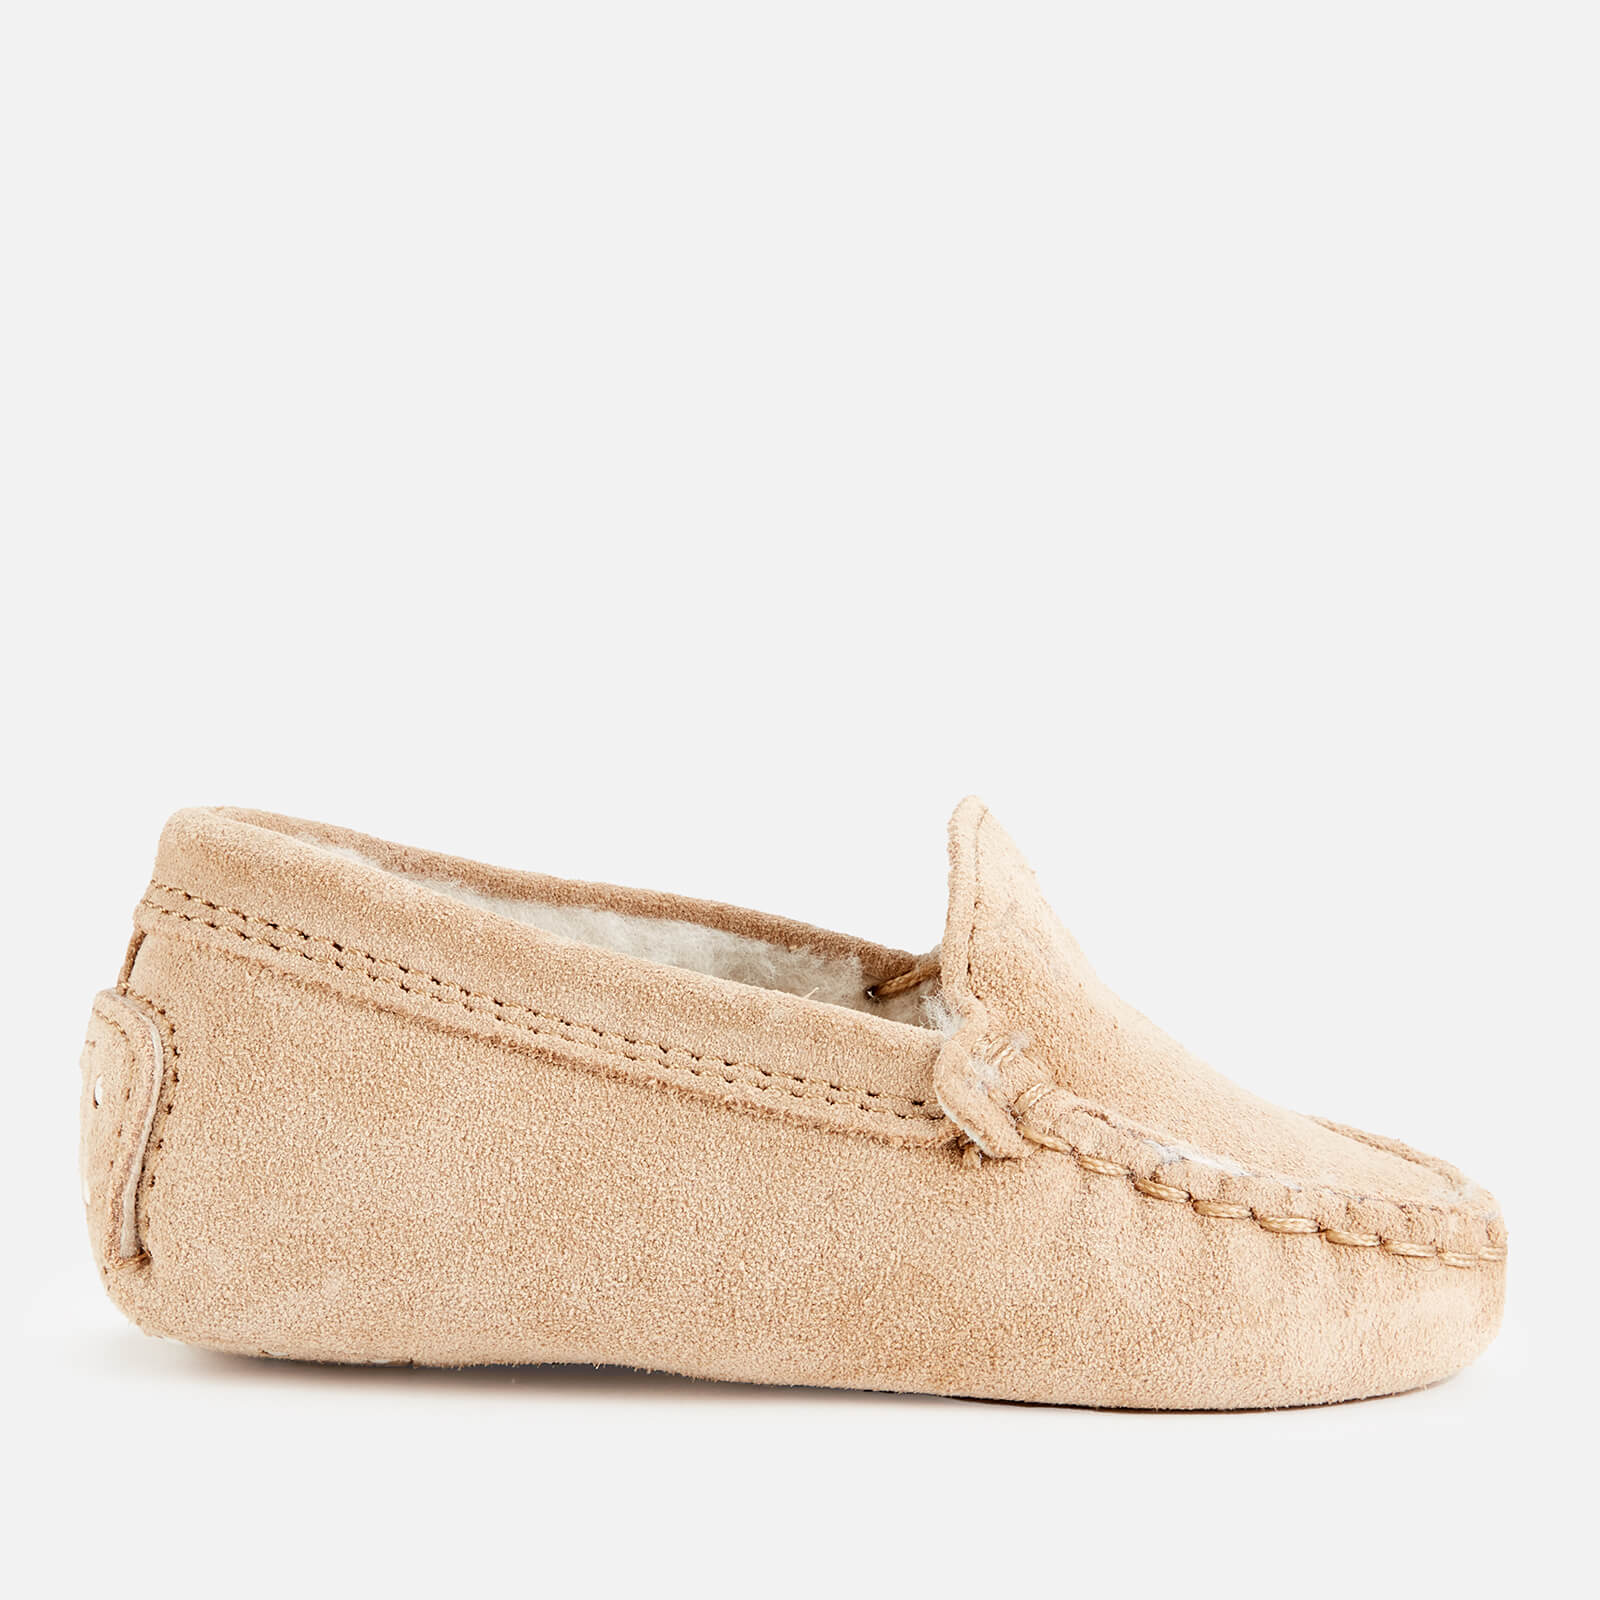 Tods Babys' Suede Moccasin Loafers - Beige - UK 1 Baby